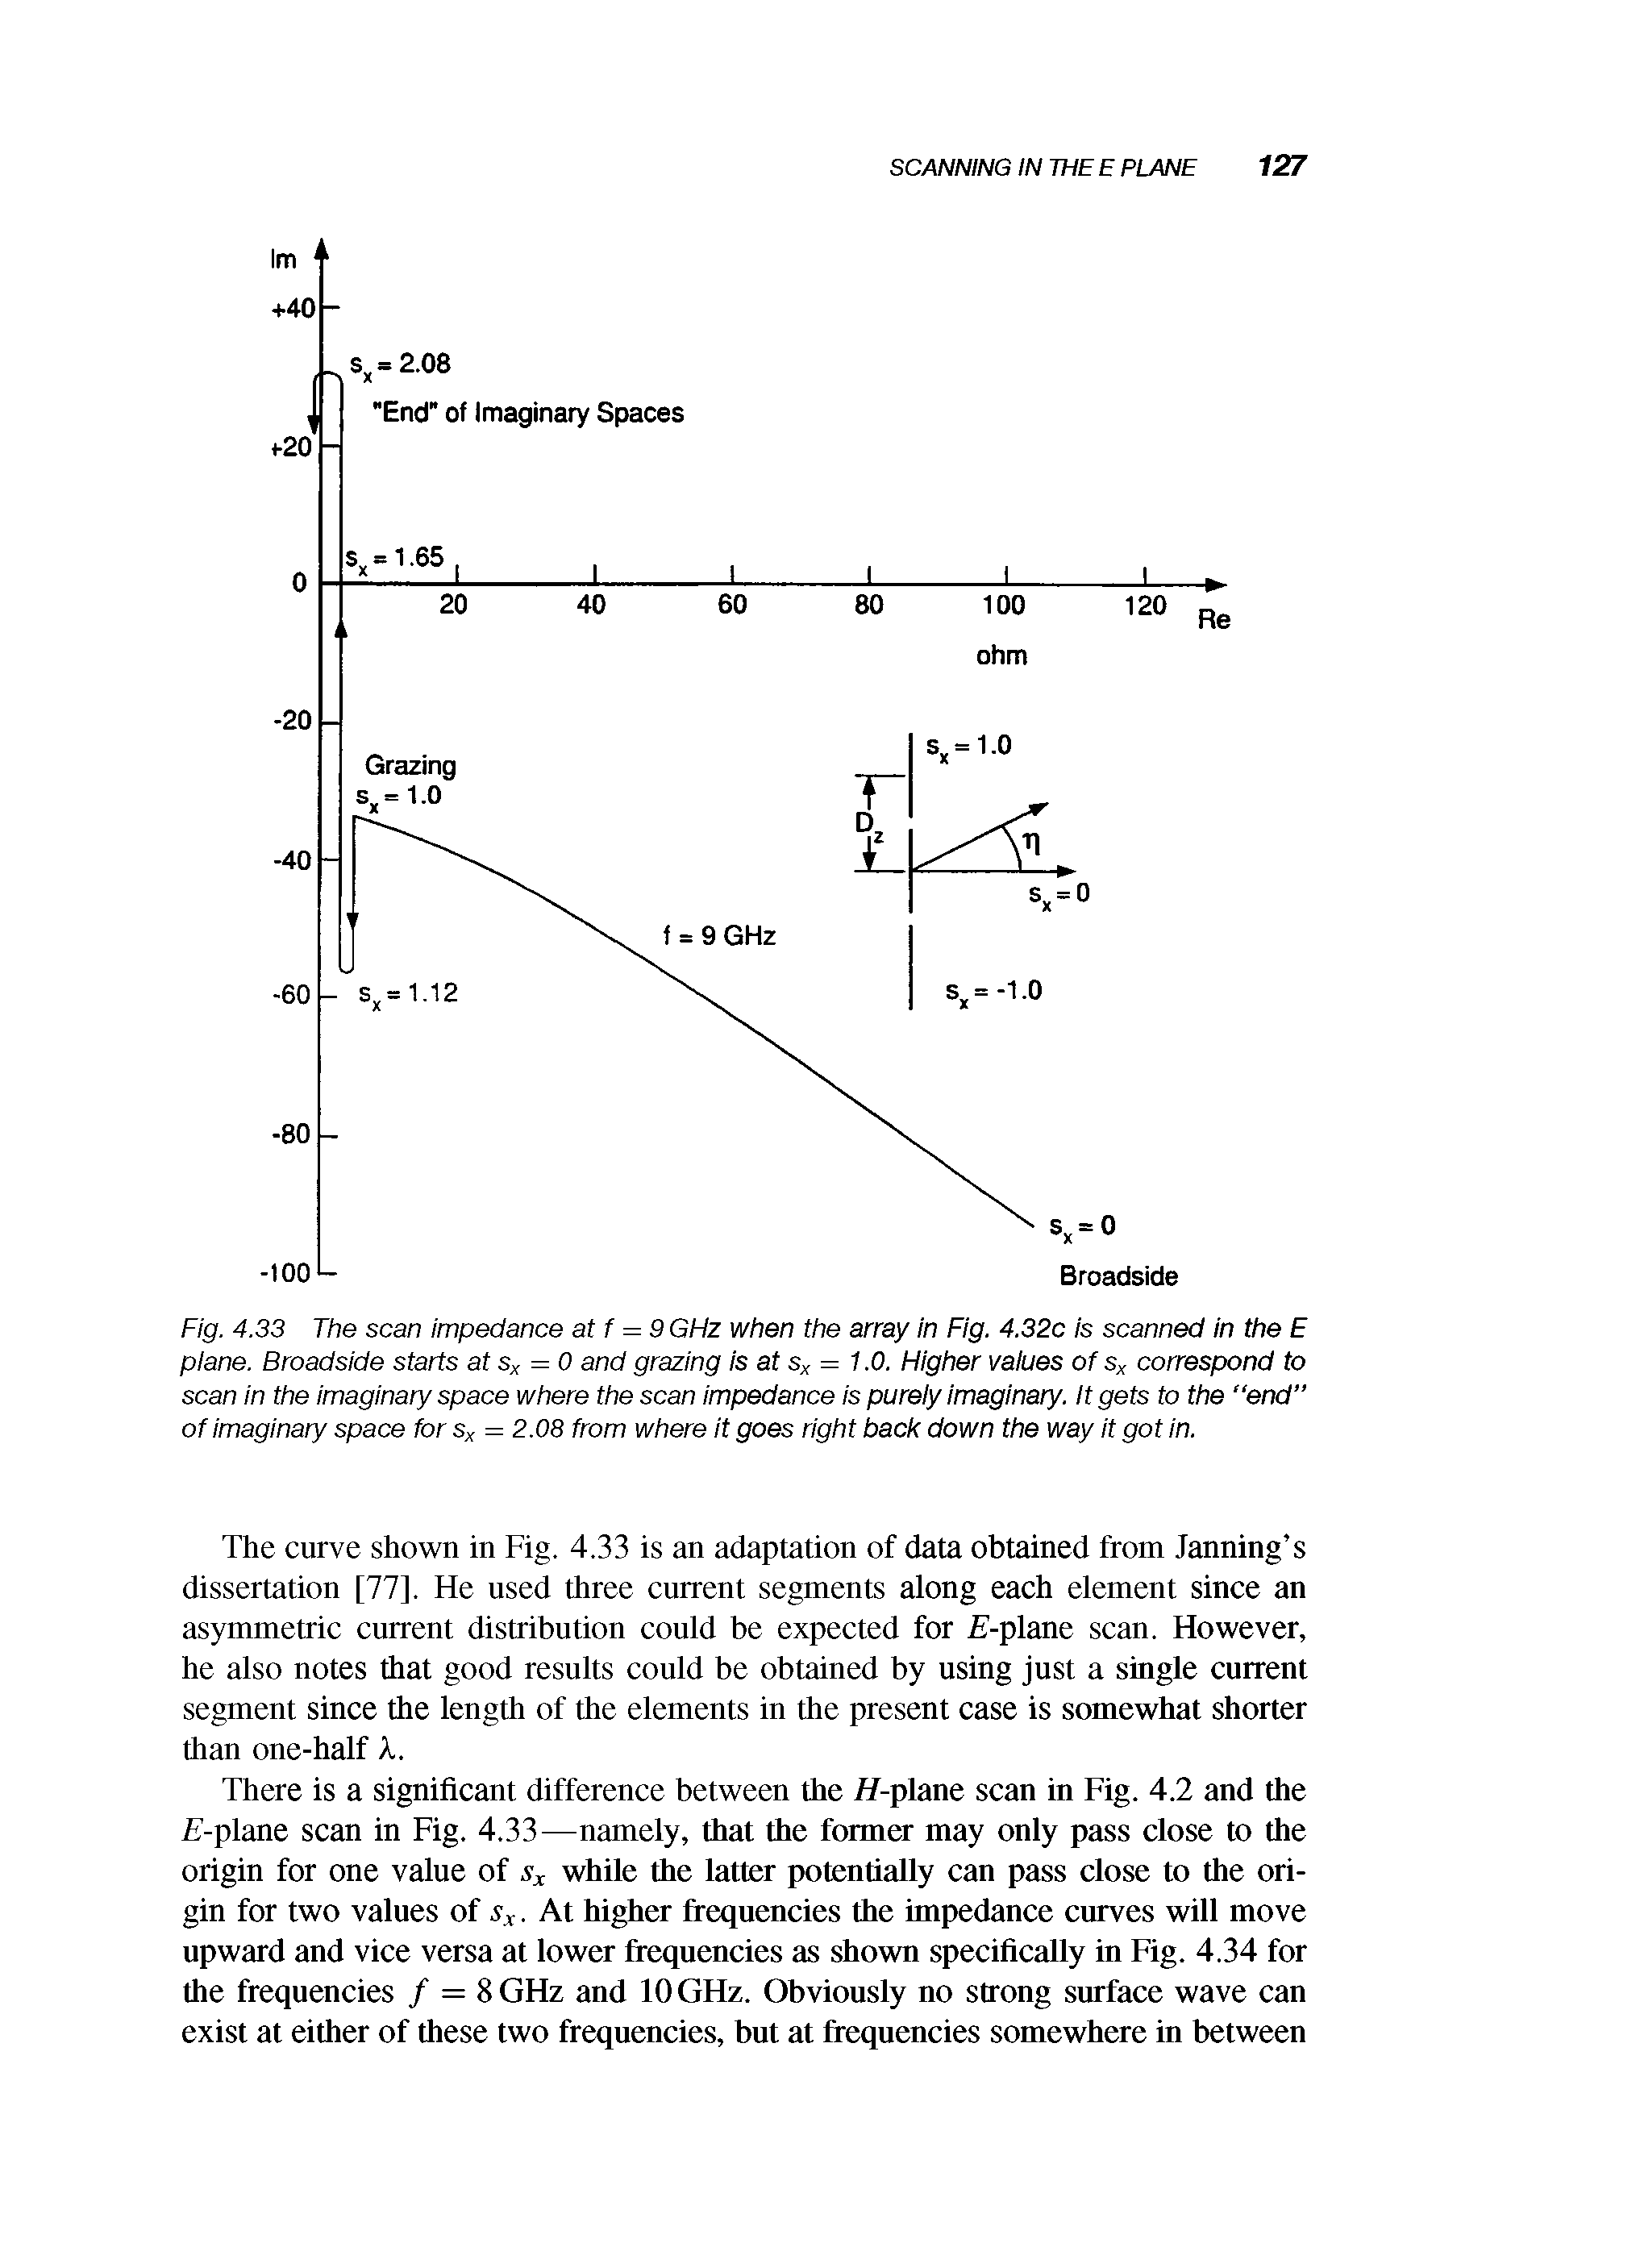 Fig. 4.33 The scan impedance atf = 9 GHz when the array in Fig. 4.32c is scanned in the E piane. Broadside starts at s> = 0 and grazing is at Sx= 1.0. Higher vaiues of s correspond to scan in the imaginary space where the scan impedance is purely Imaginary. It gets to the "end of imaginary space for Sx = 2.08 from where it goes right back down the way it got in.